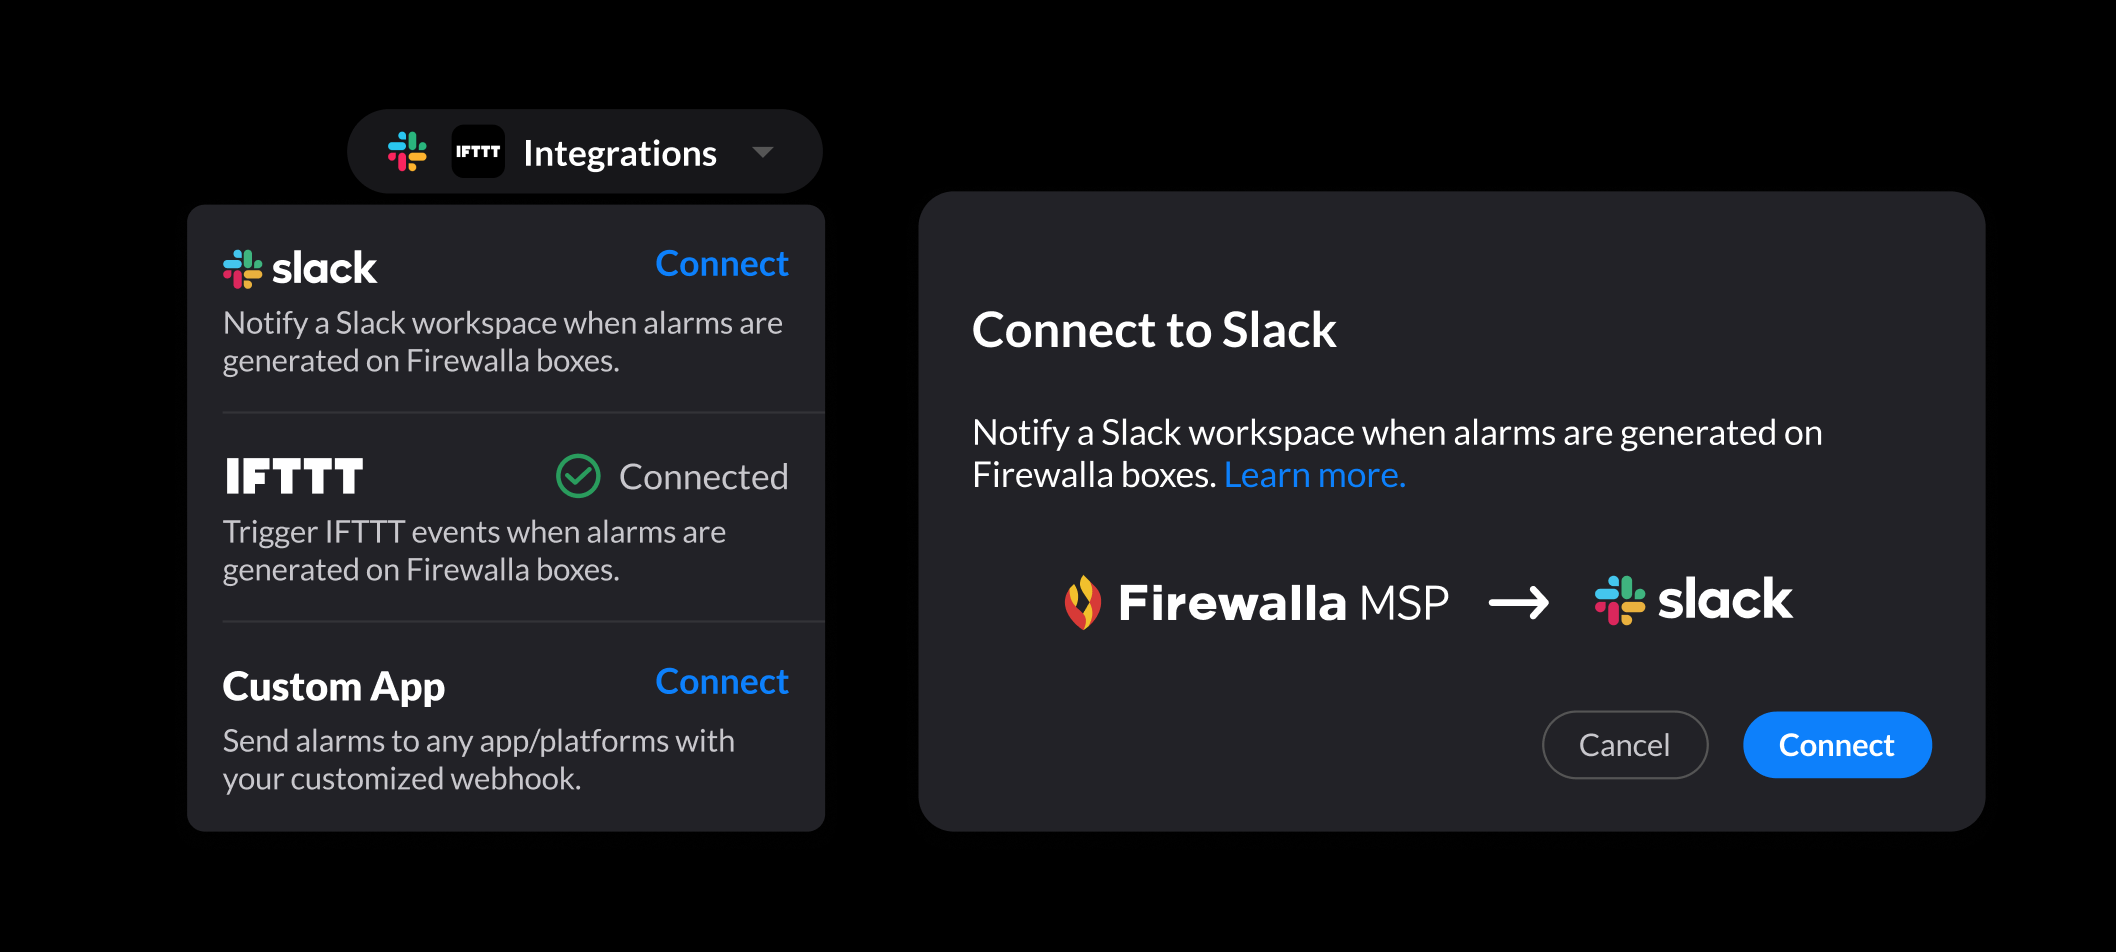 Firewalla MSP Portal with 3rd-Party integration with Slack, IFTTT, or custom apps